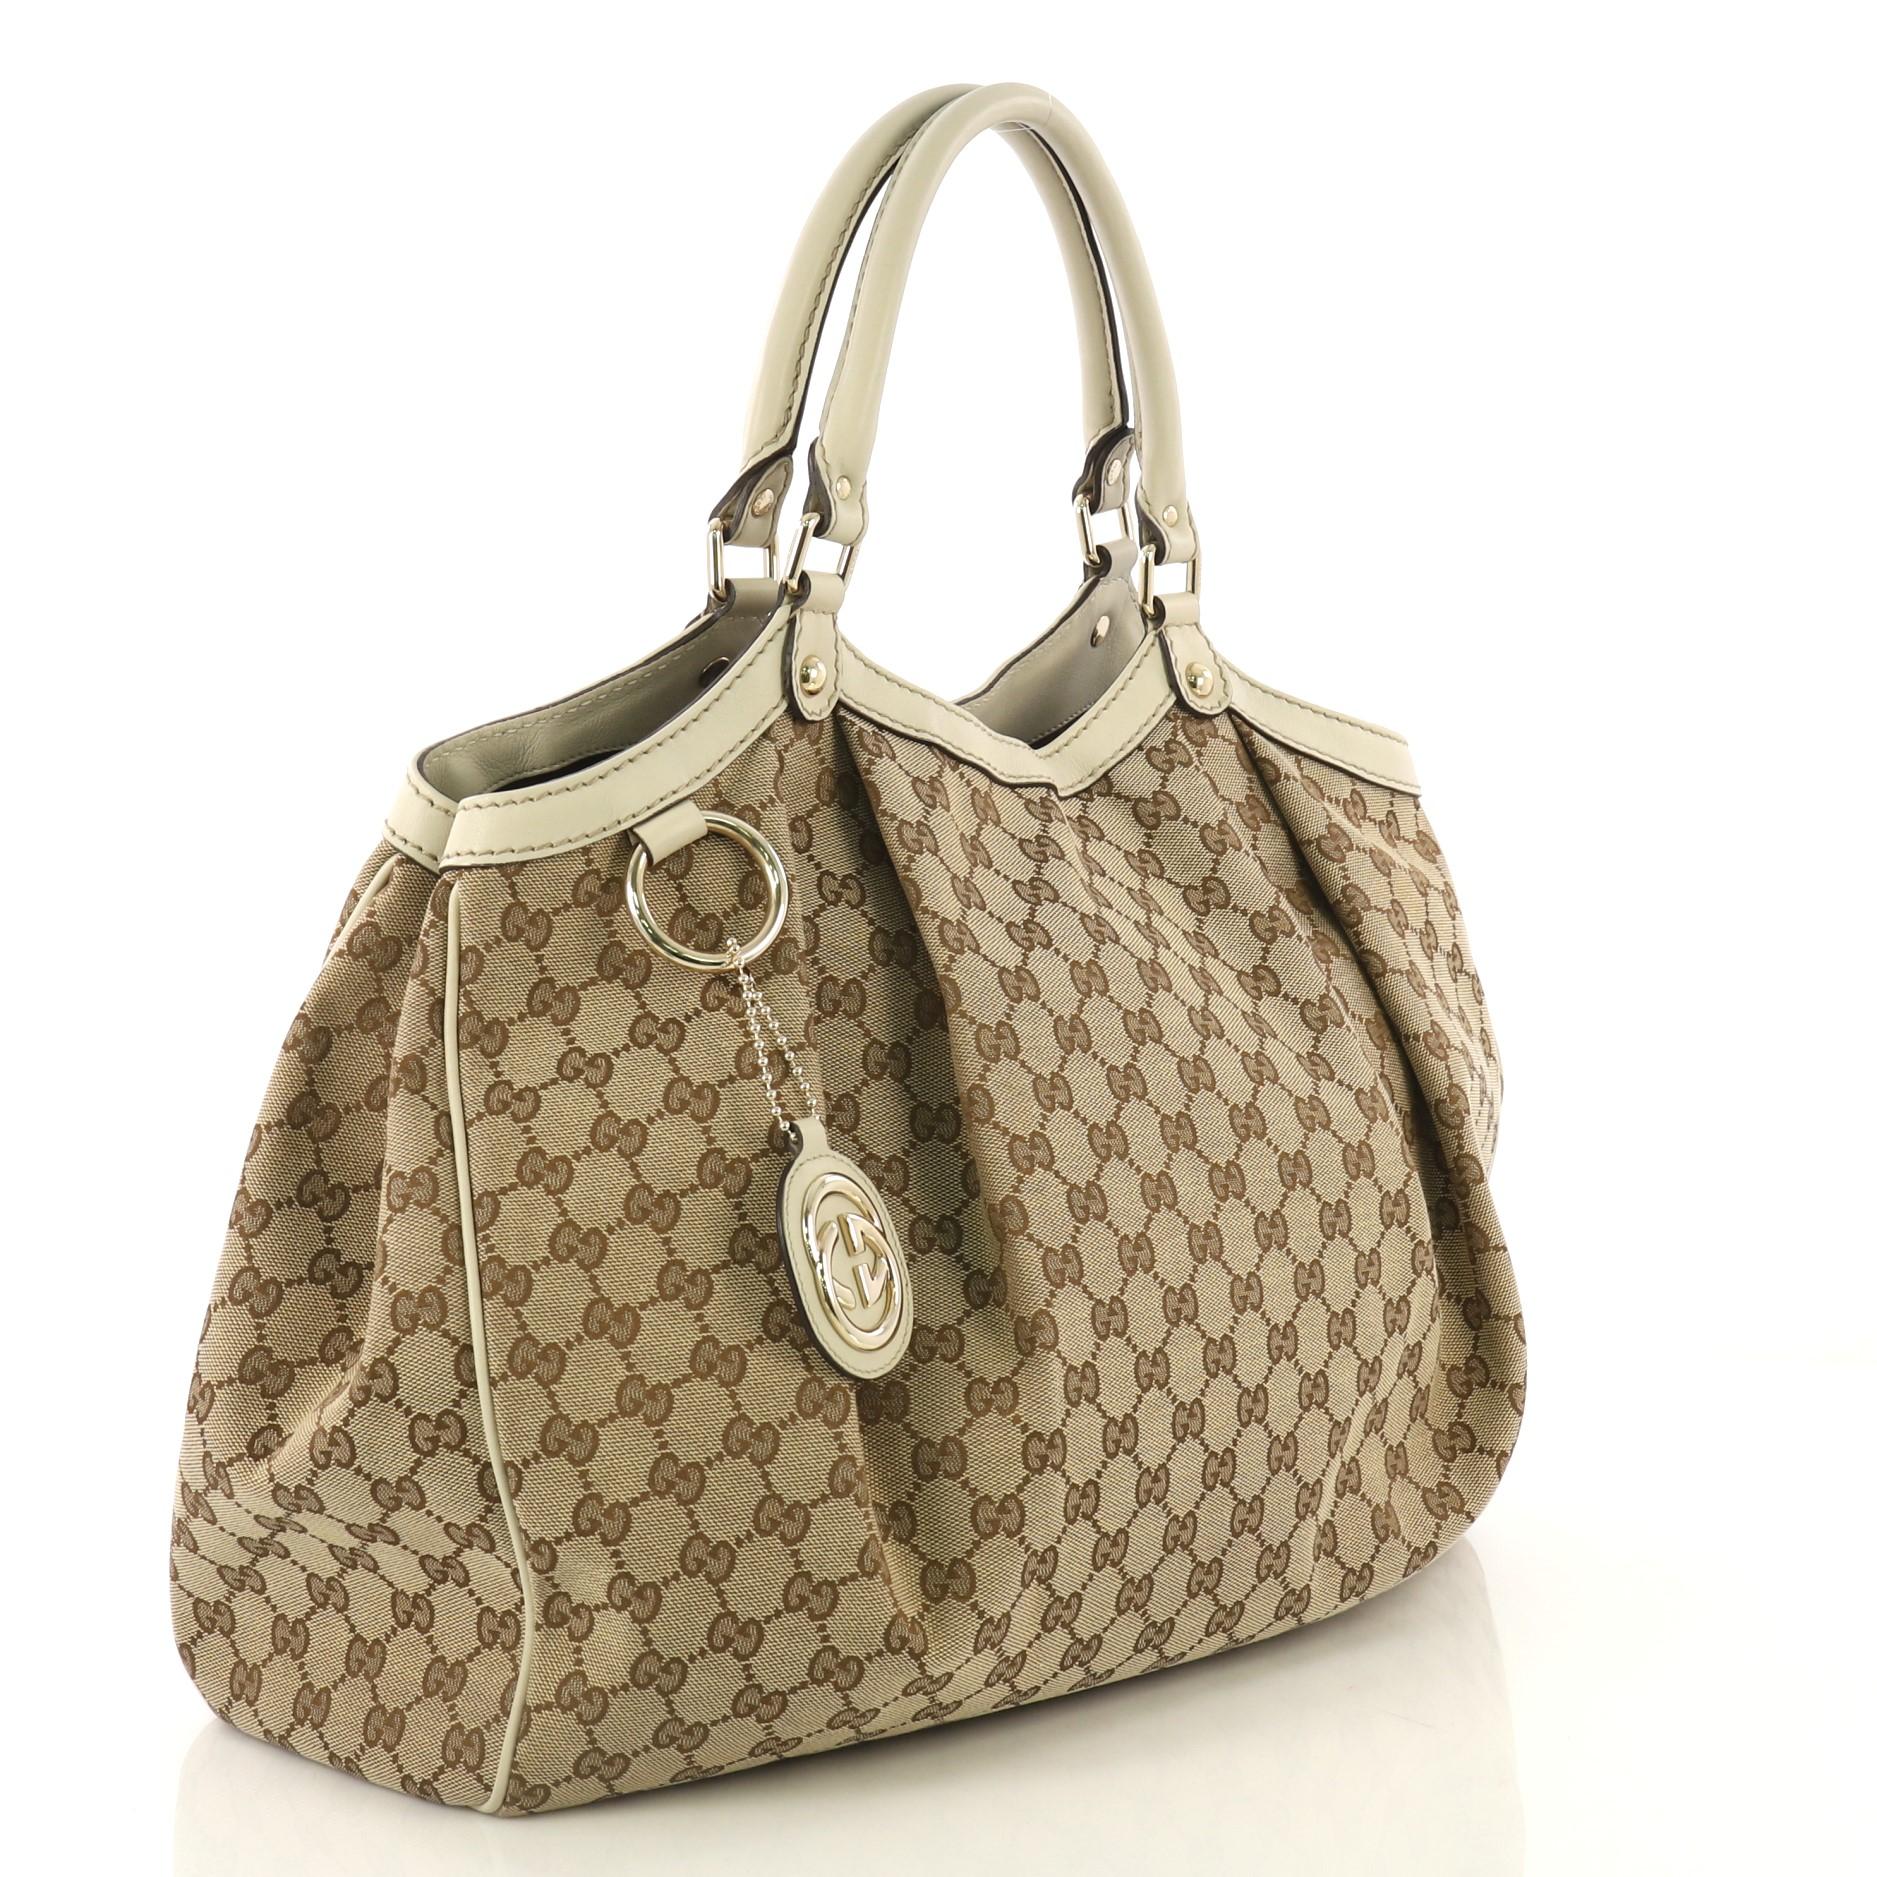 This Gucci Sukey Tote GG Canvas Large, crafted from brown GG canvas and light gray leather, features dual rolled leather handles, leather trim, and gold-tone hardware. Its magnetic snap closure opens to a dark brown fabric interior with zip pocket.